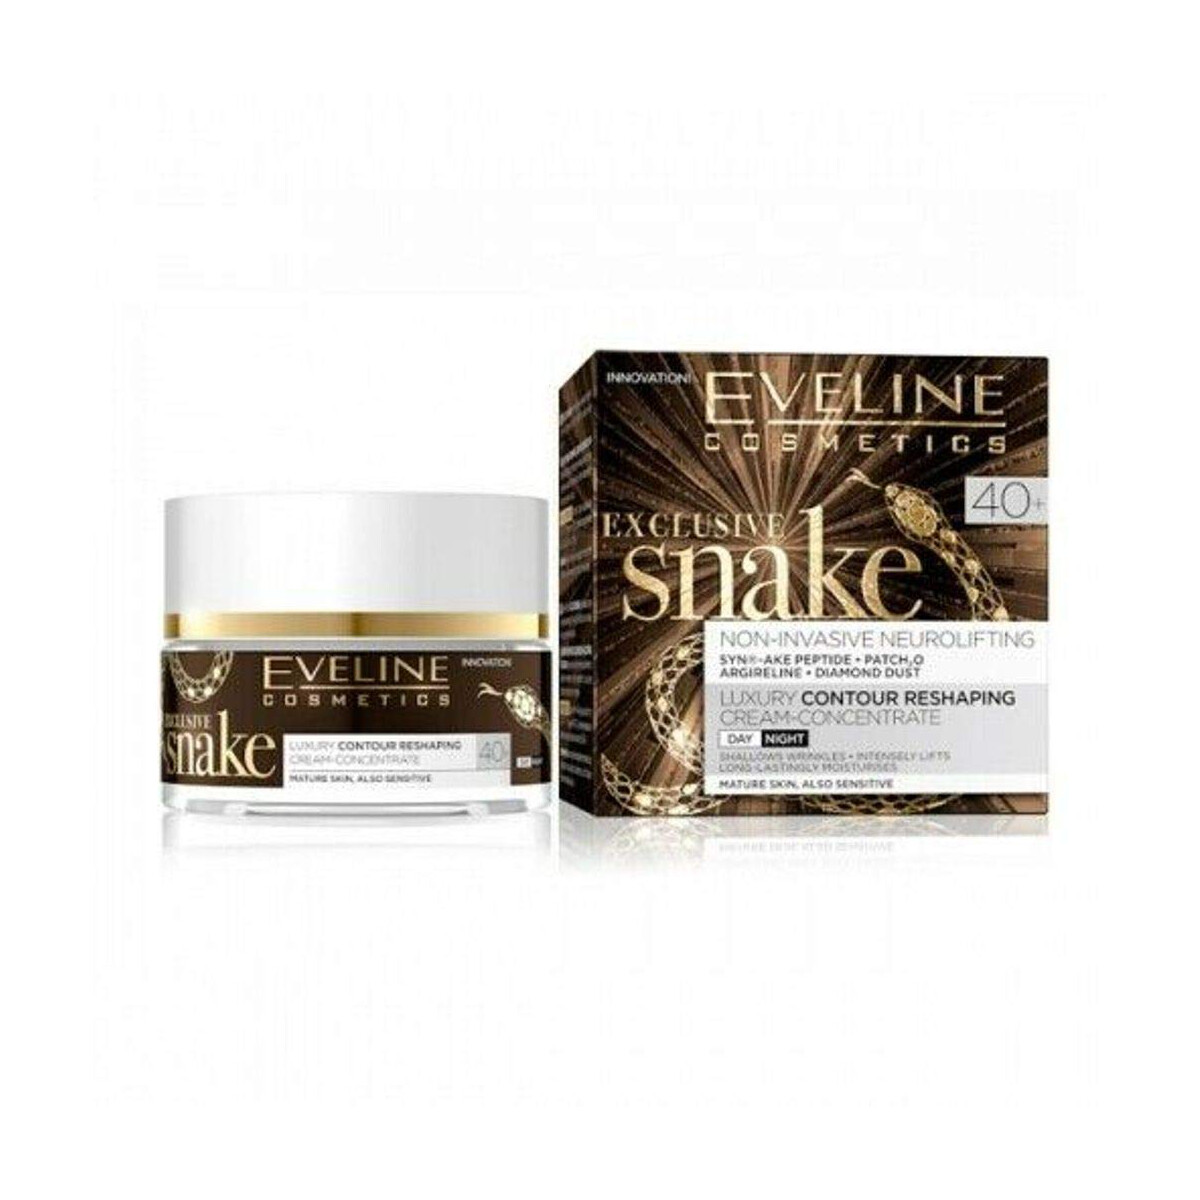 Exclusive Snake Neurolifting Luxury Contour Reshaping Day and Night Cream For Ages 40 and Up (T)